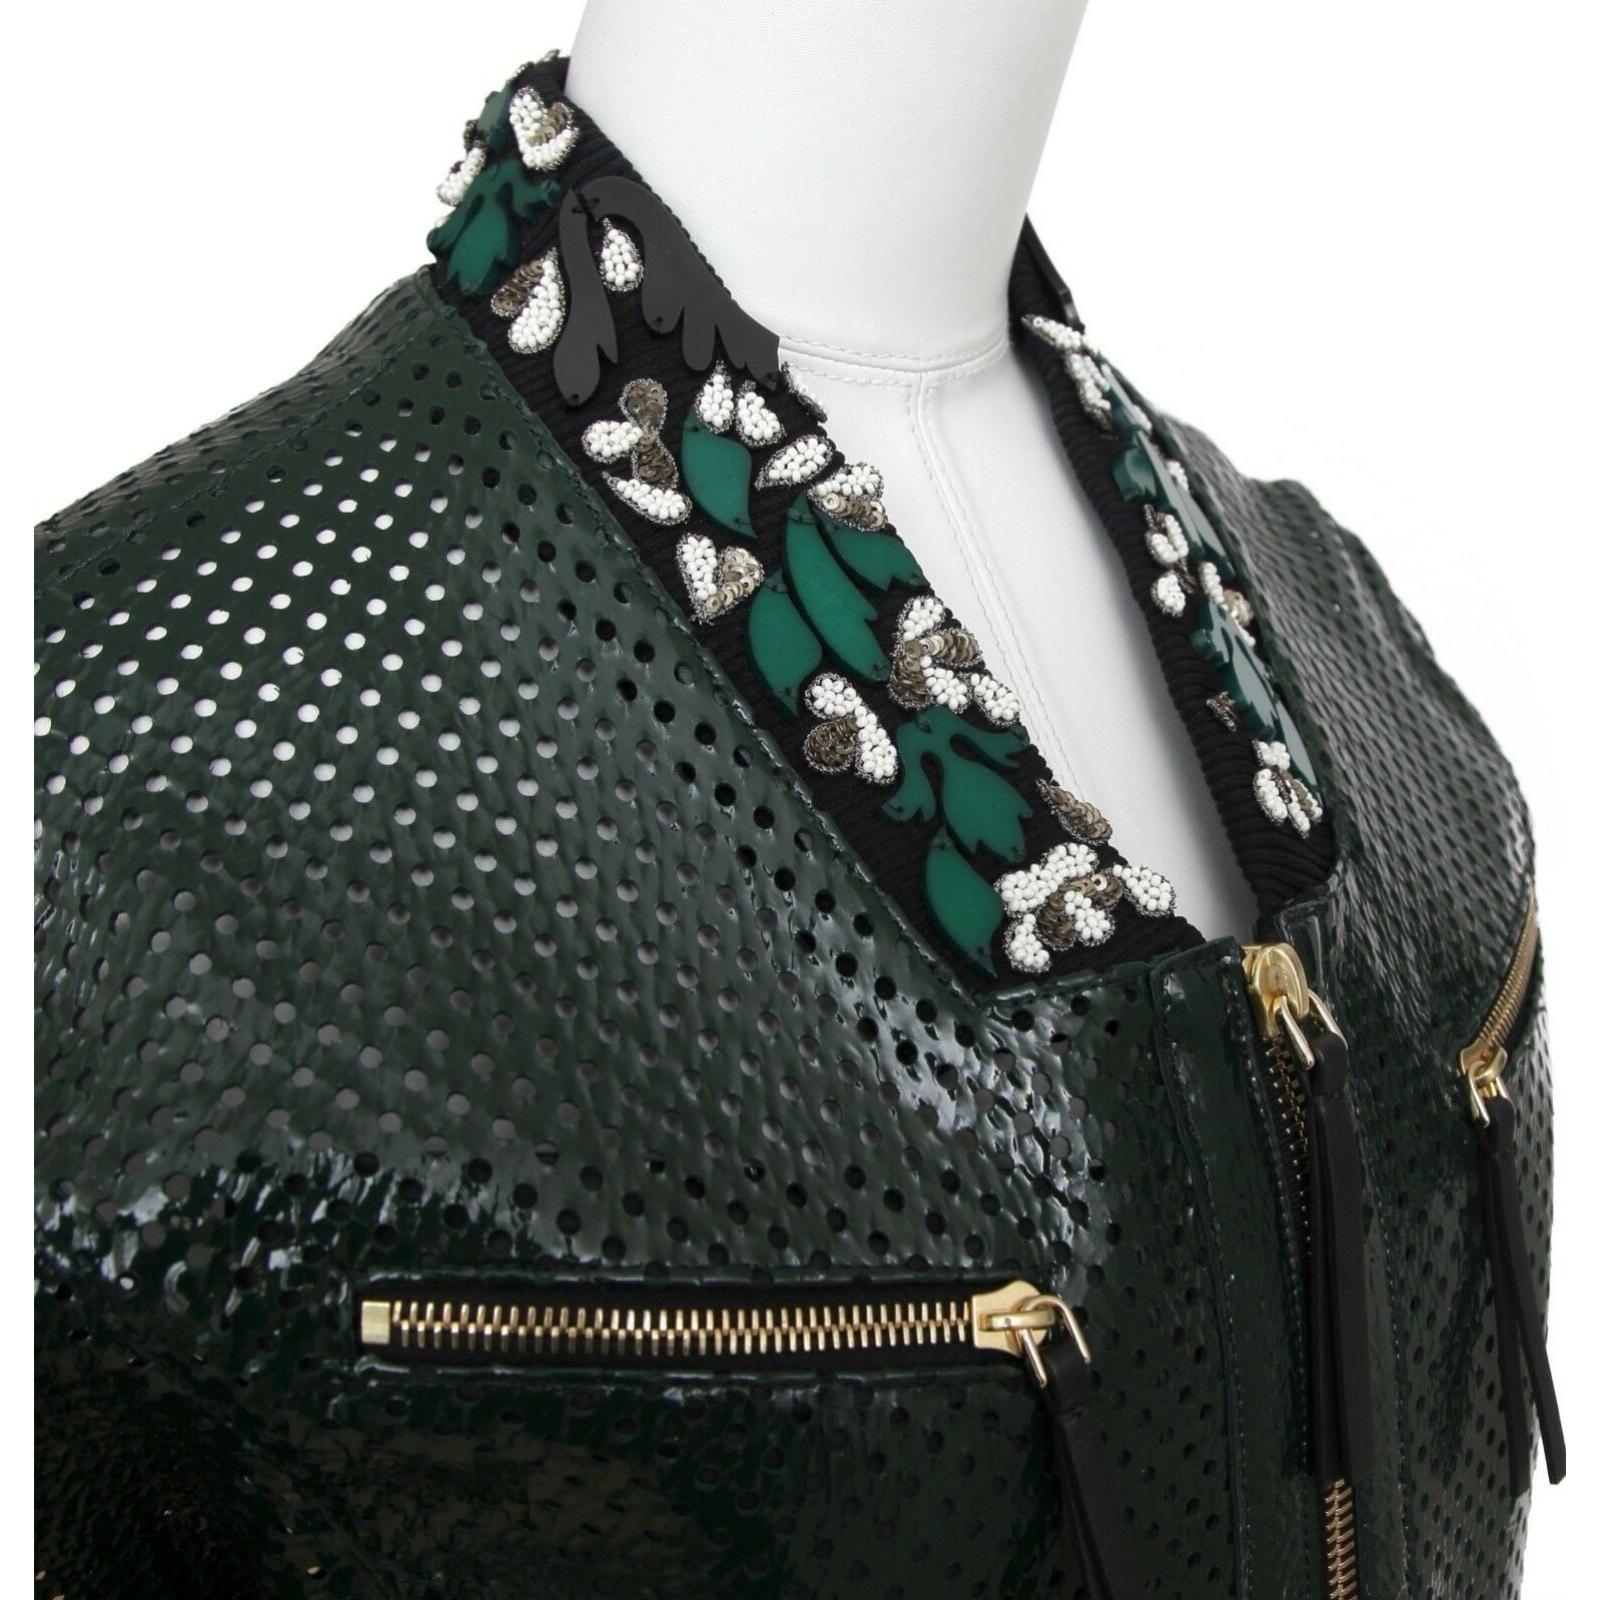 MARNI Green Patent Leather Jacket Perforated Emerald Bomber Coat Floral Sz 38 BN In New Condition For Sale In Hollywood, FL